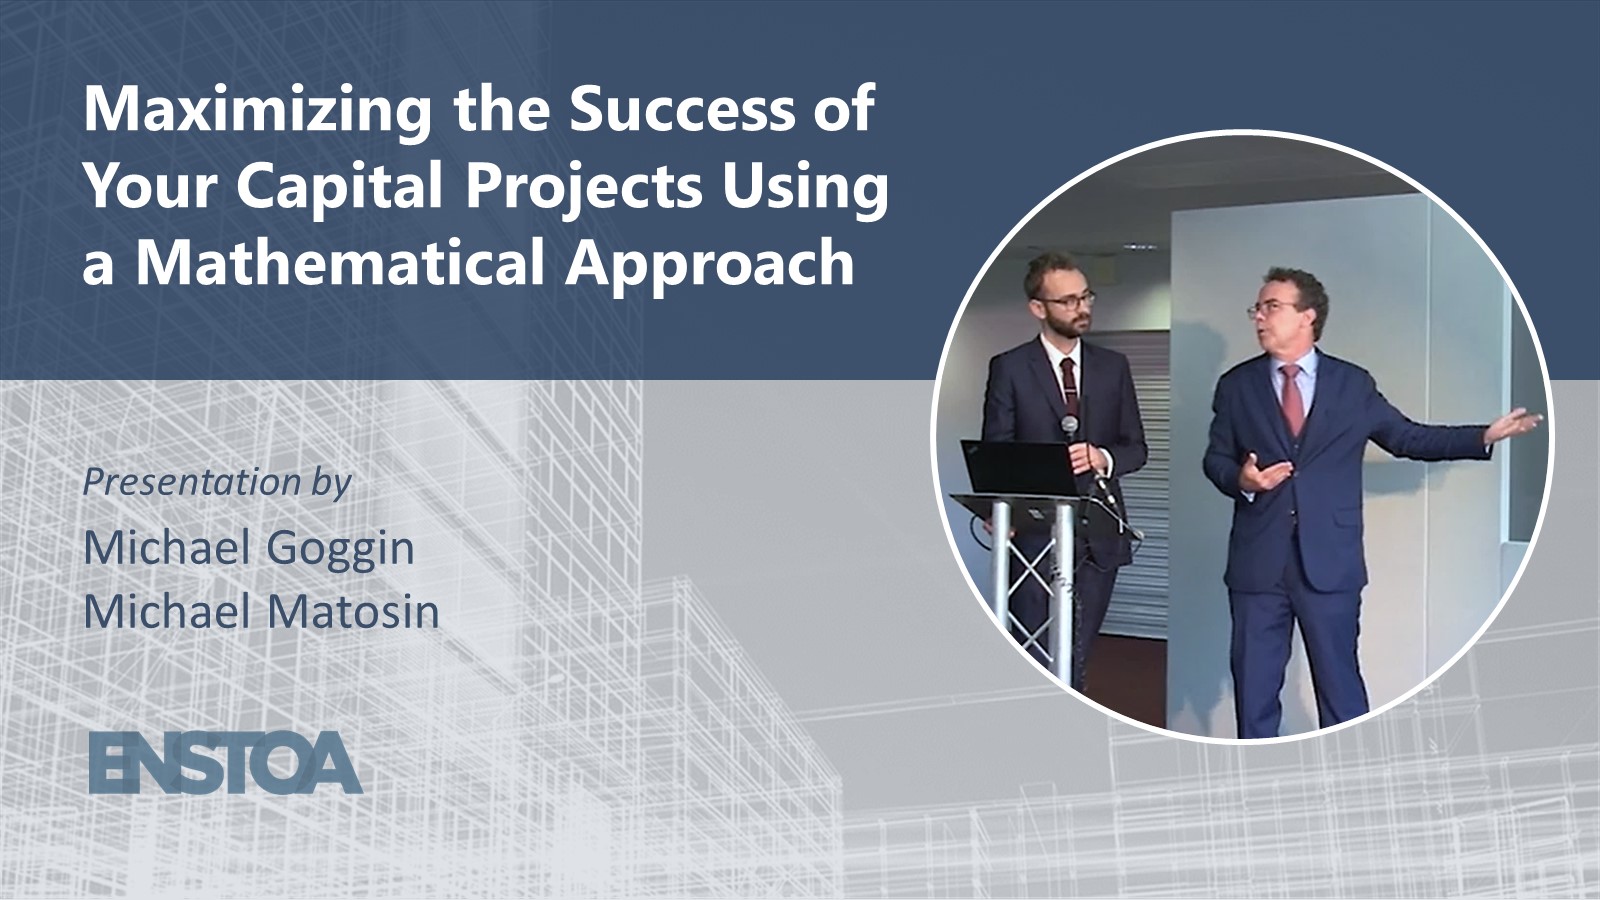 Maximizing the Success of Your Capital Projects using a Mathematical Approach